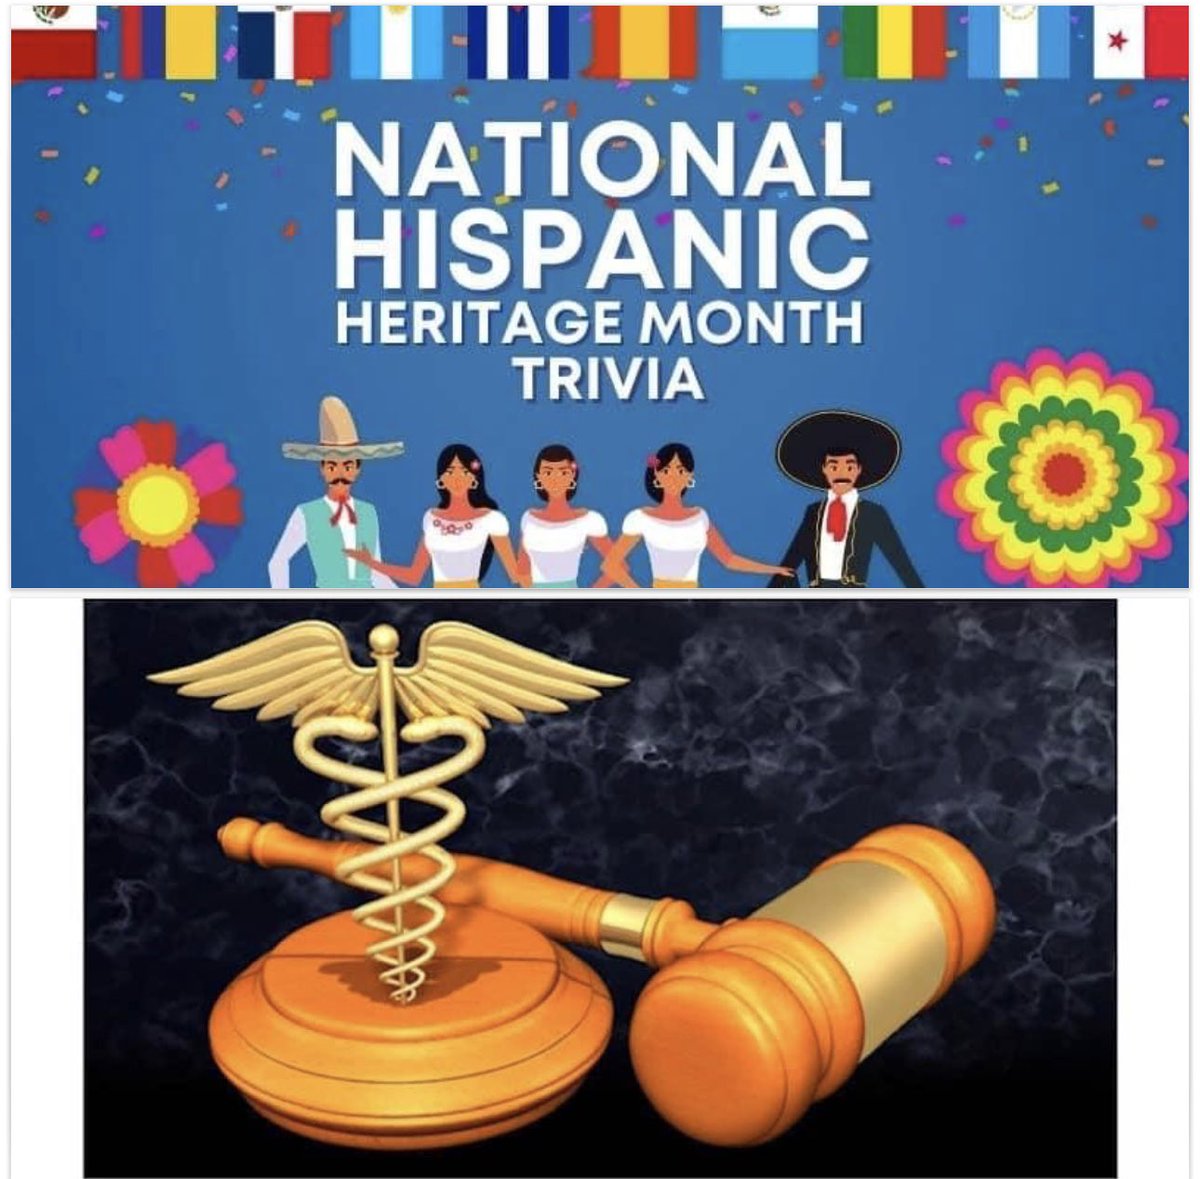 HISPANIC HERITAGE MONTH 2023
The last day of National Hispanic Heritage Month 2023 ends today. The United States is not producing enough physicians or lawyers to serve the country’s Latino population: lnkd.in/gZvxzBYF

#educationandschools #educationequity